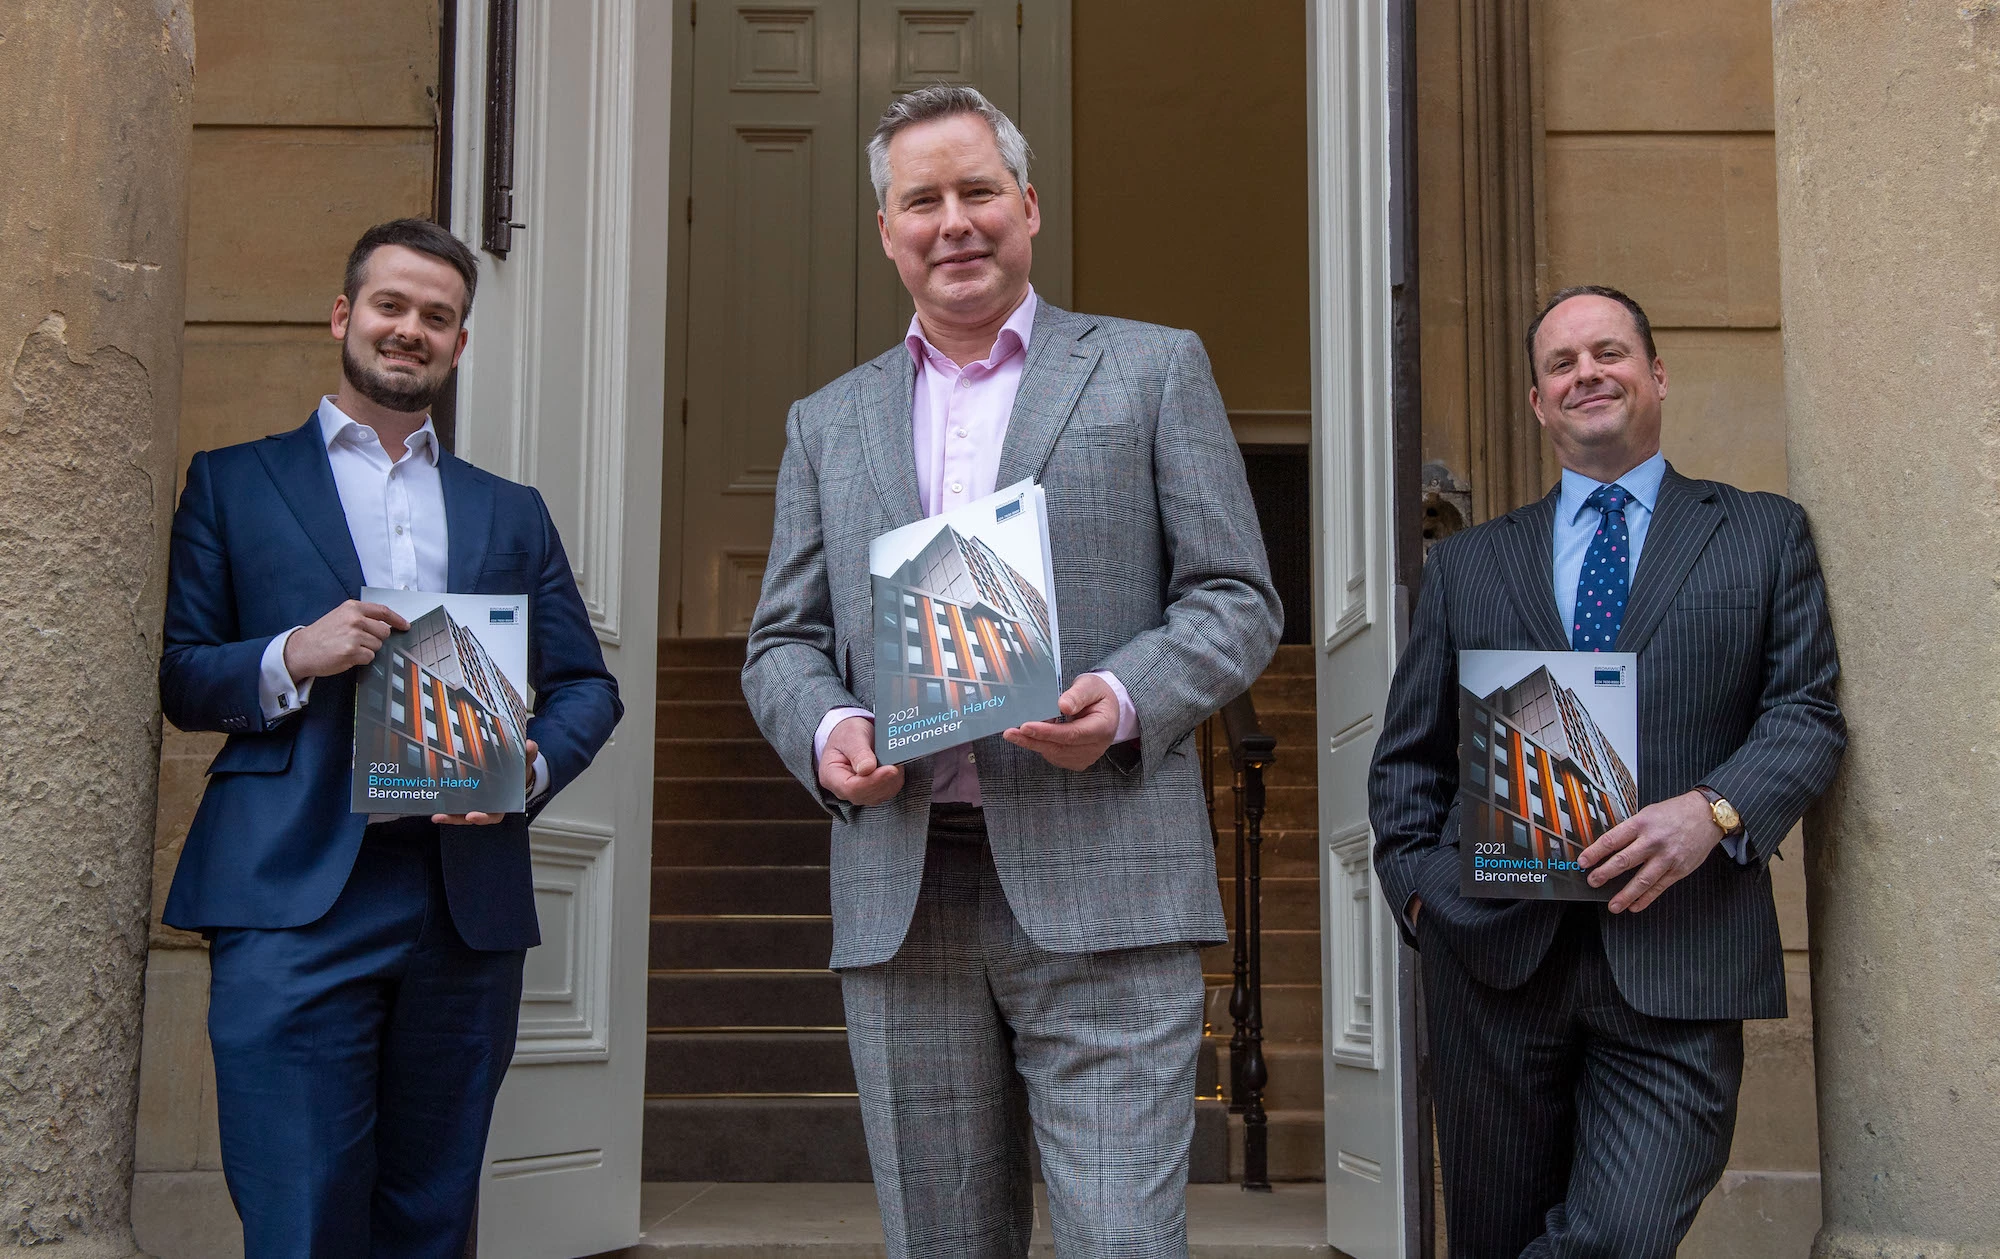 Jonathan Browning of CoStar with Tom Bromwich and David Penn of Bromwich Hardy launch the Barometer